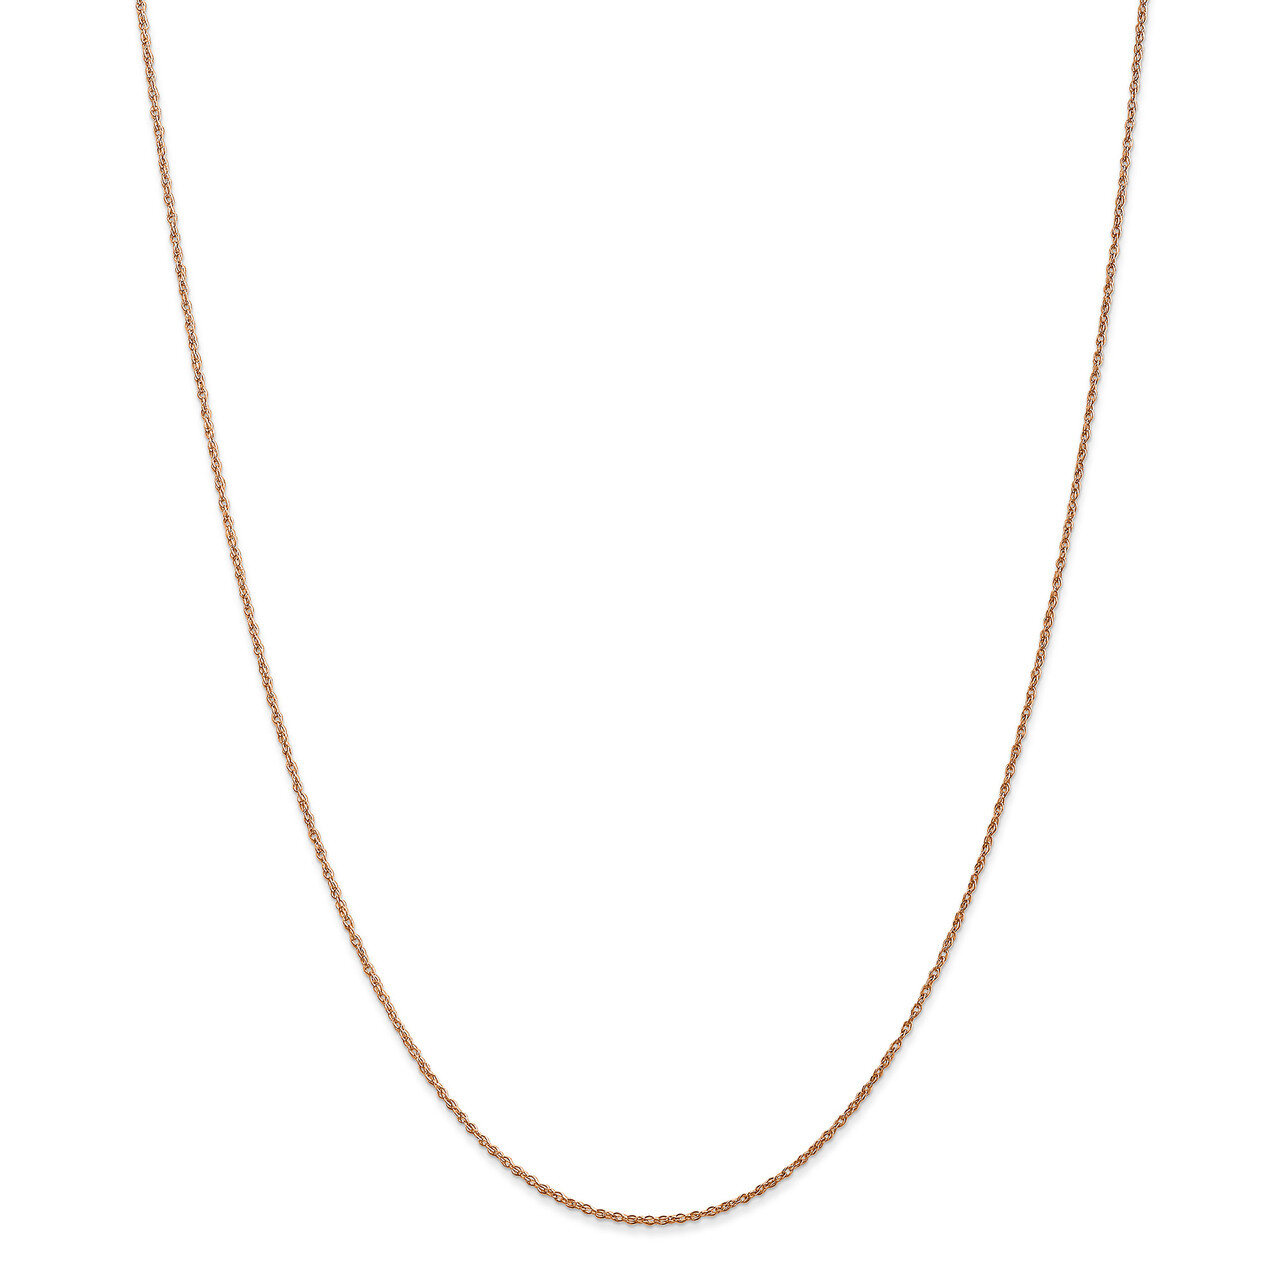 24 Inch 0.8mm Light-Baby Rope Chain 14k Rose Gold RSC35-24